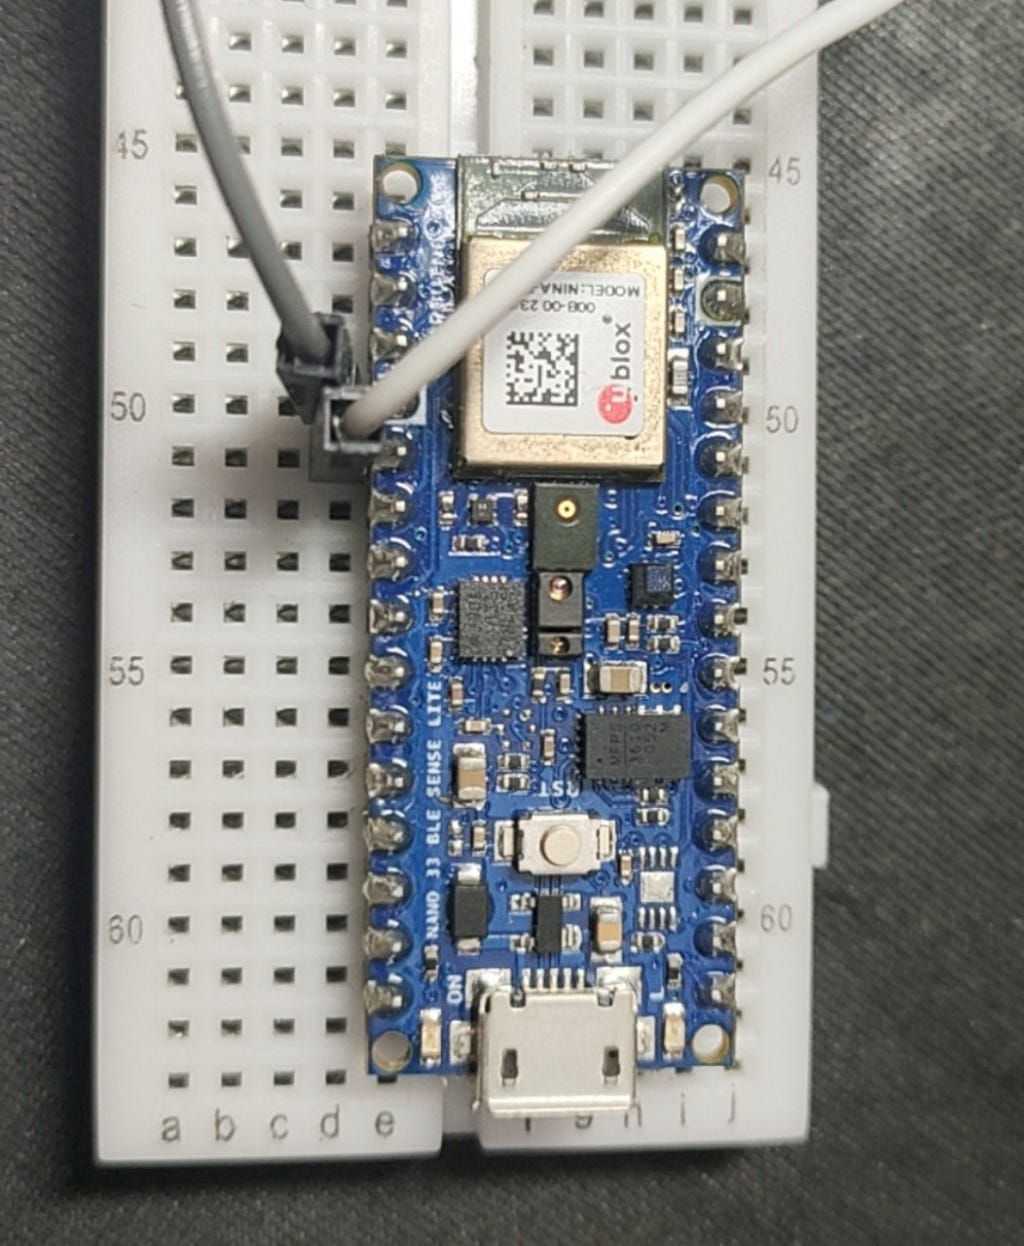 2 wires connected to GND pin (white layered) and D2 pin